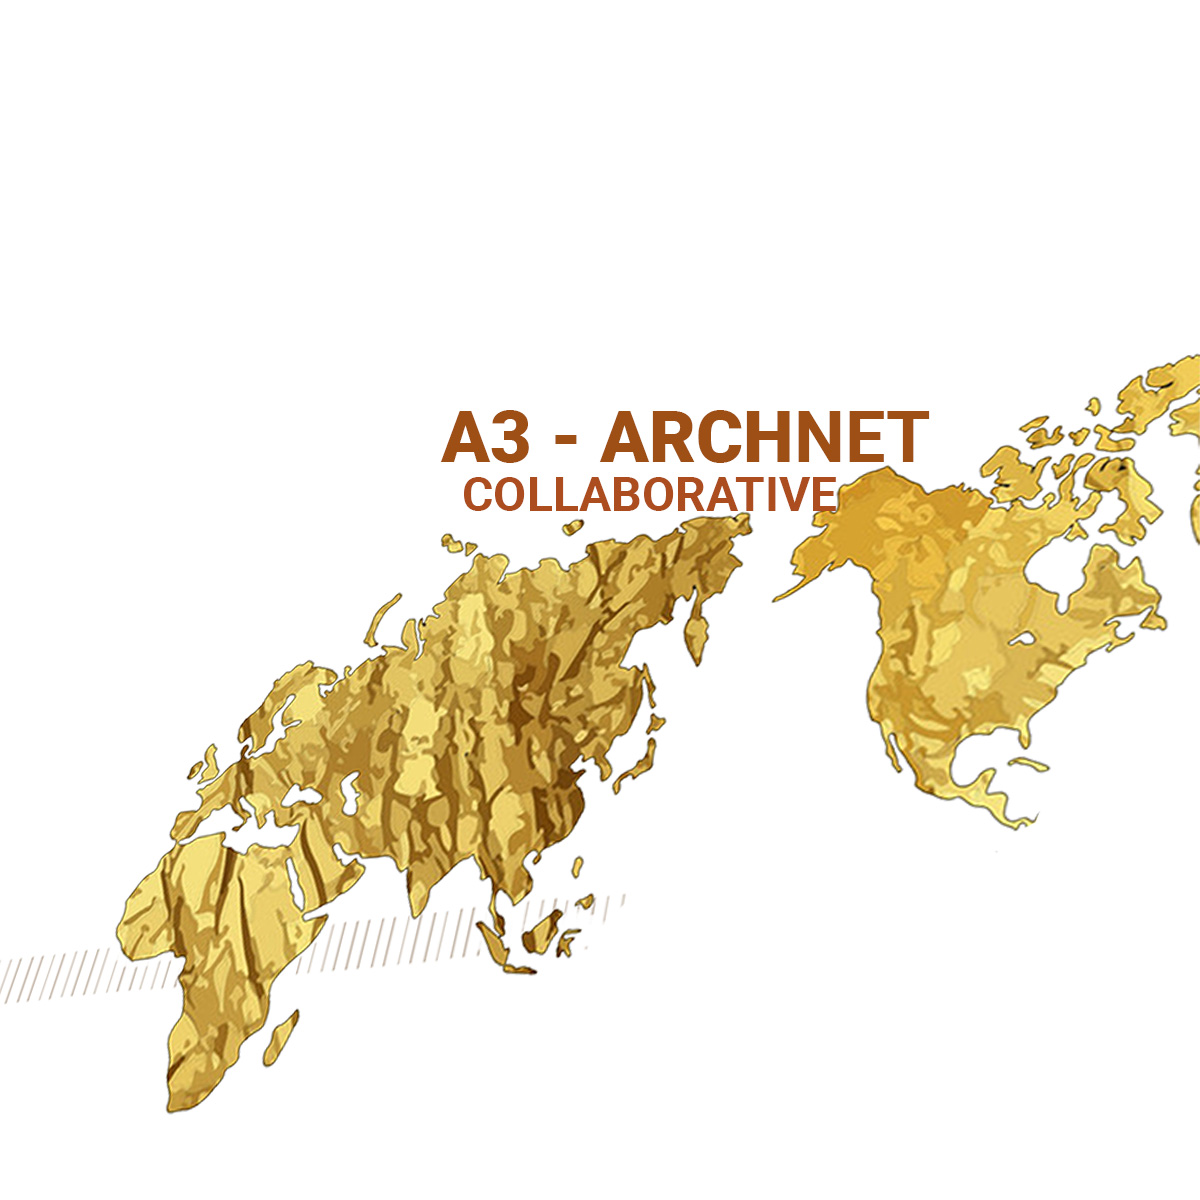 A3-Archnet Collaborative for the Documentation of Africa's Built Heritage